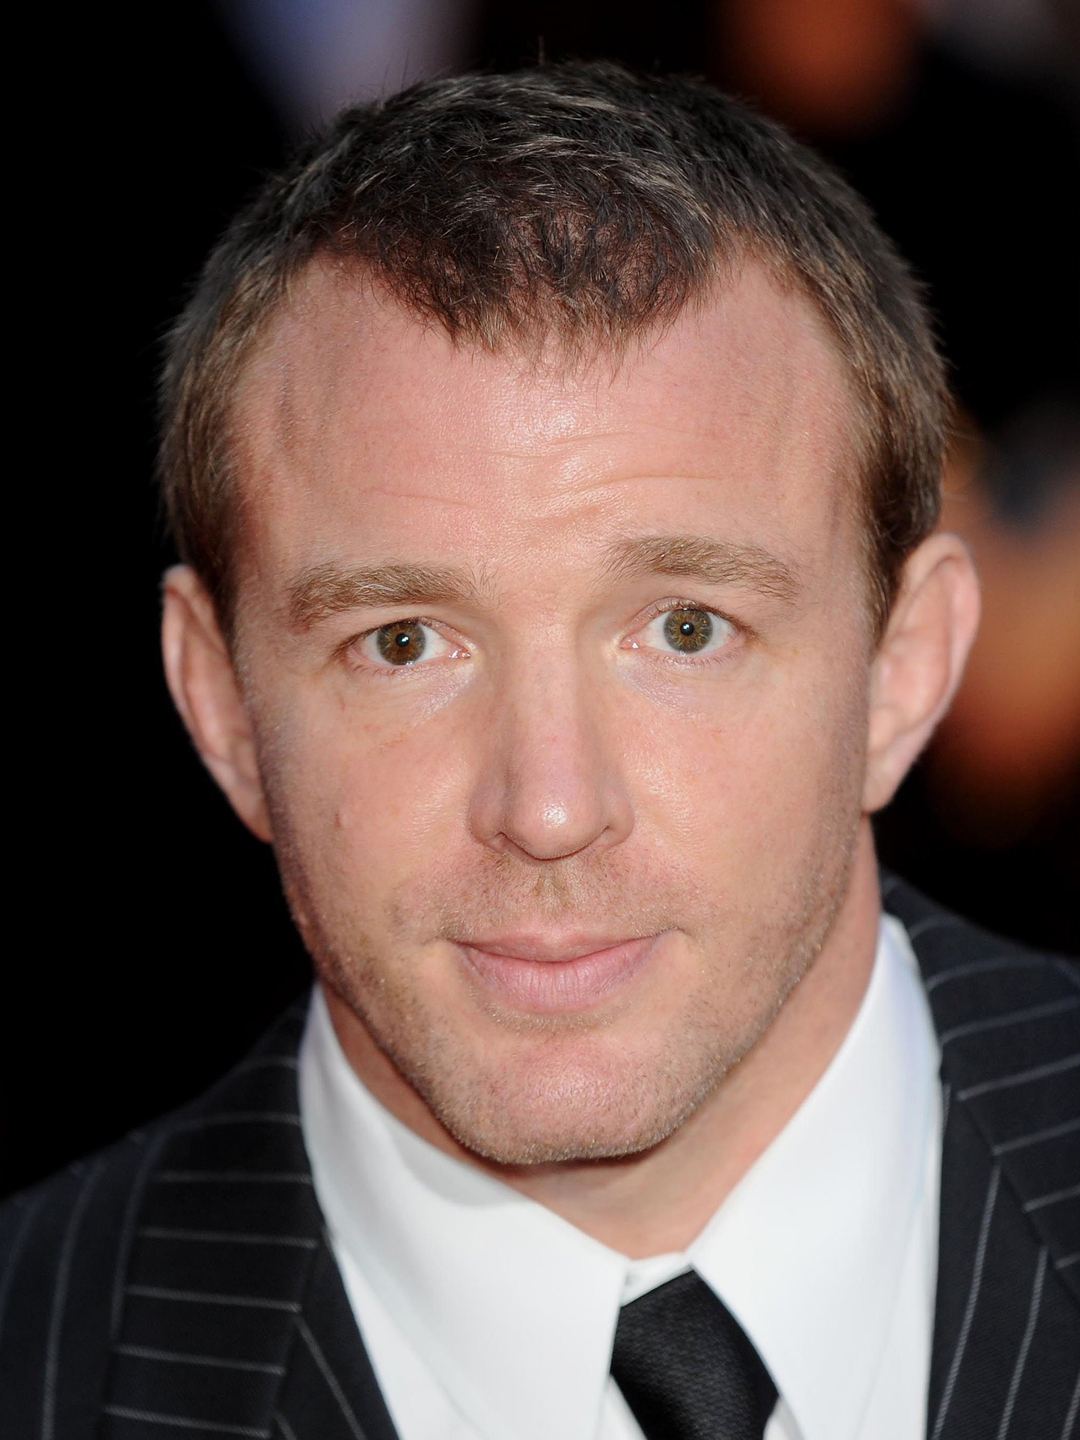 Guy Ritchie relationship